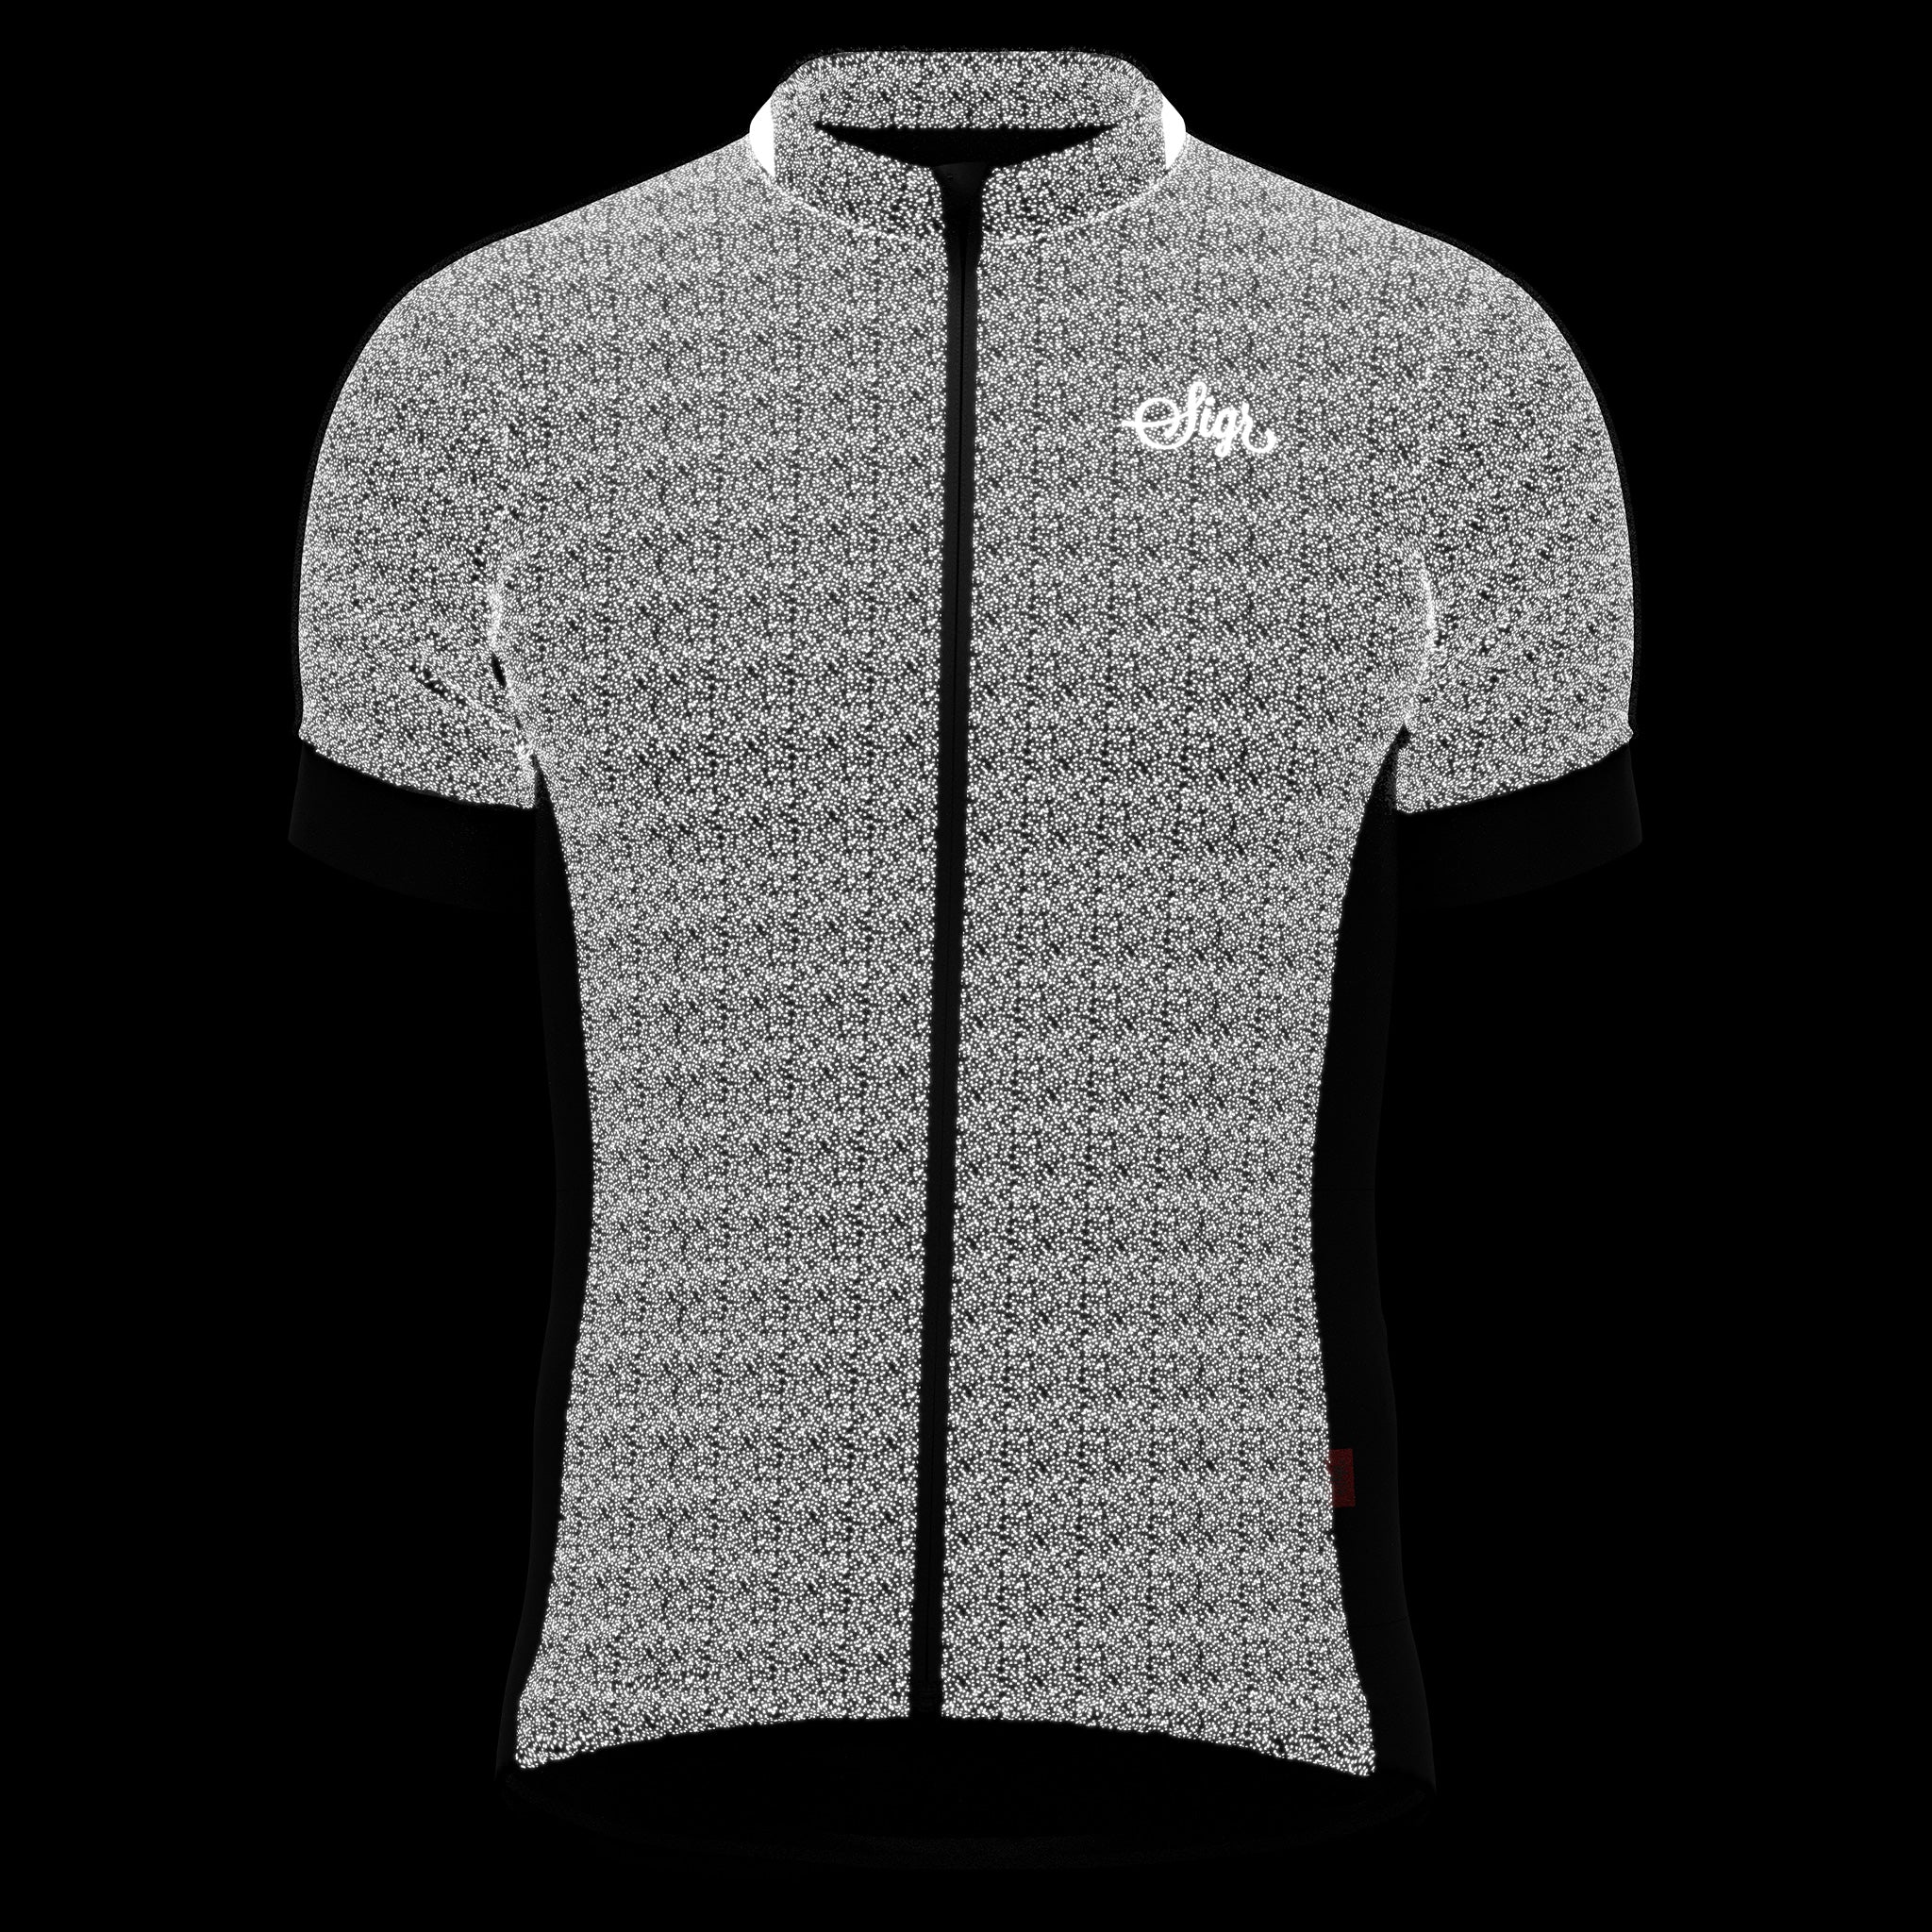 Reflective Cycling Jersey for Women 